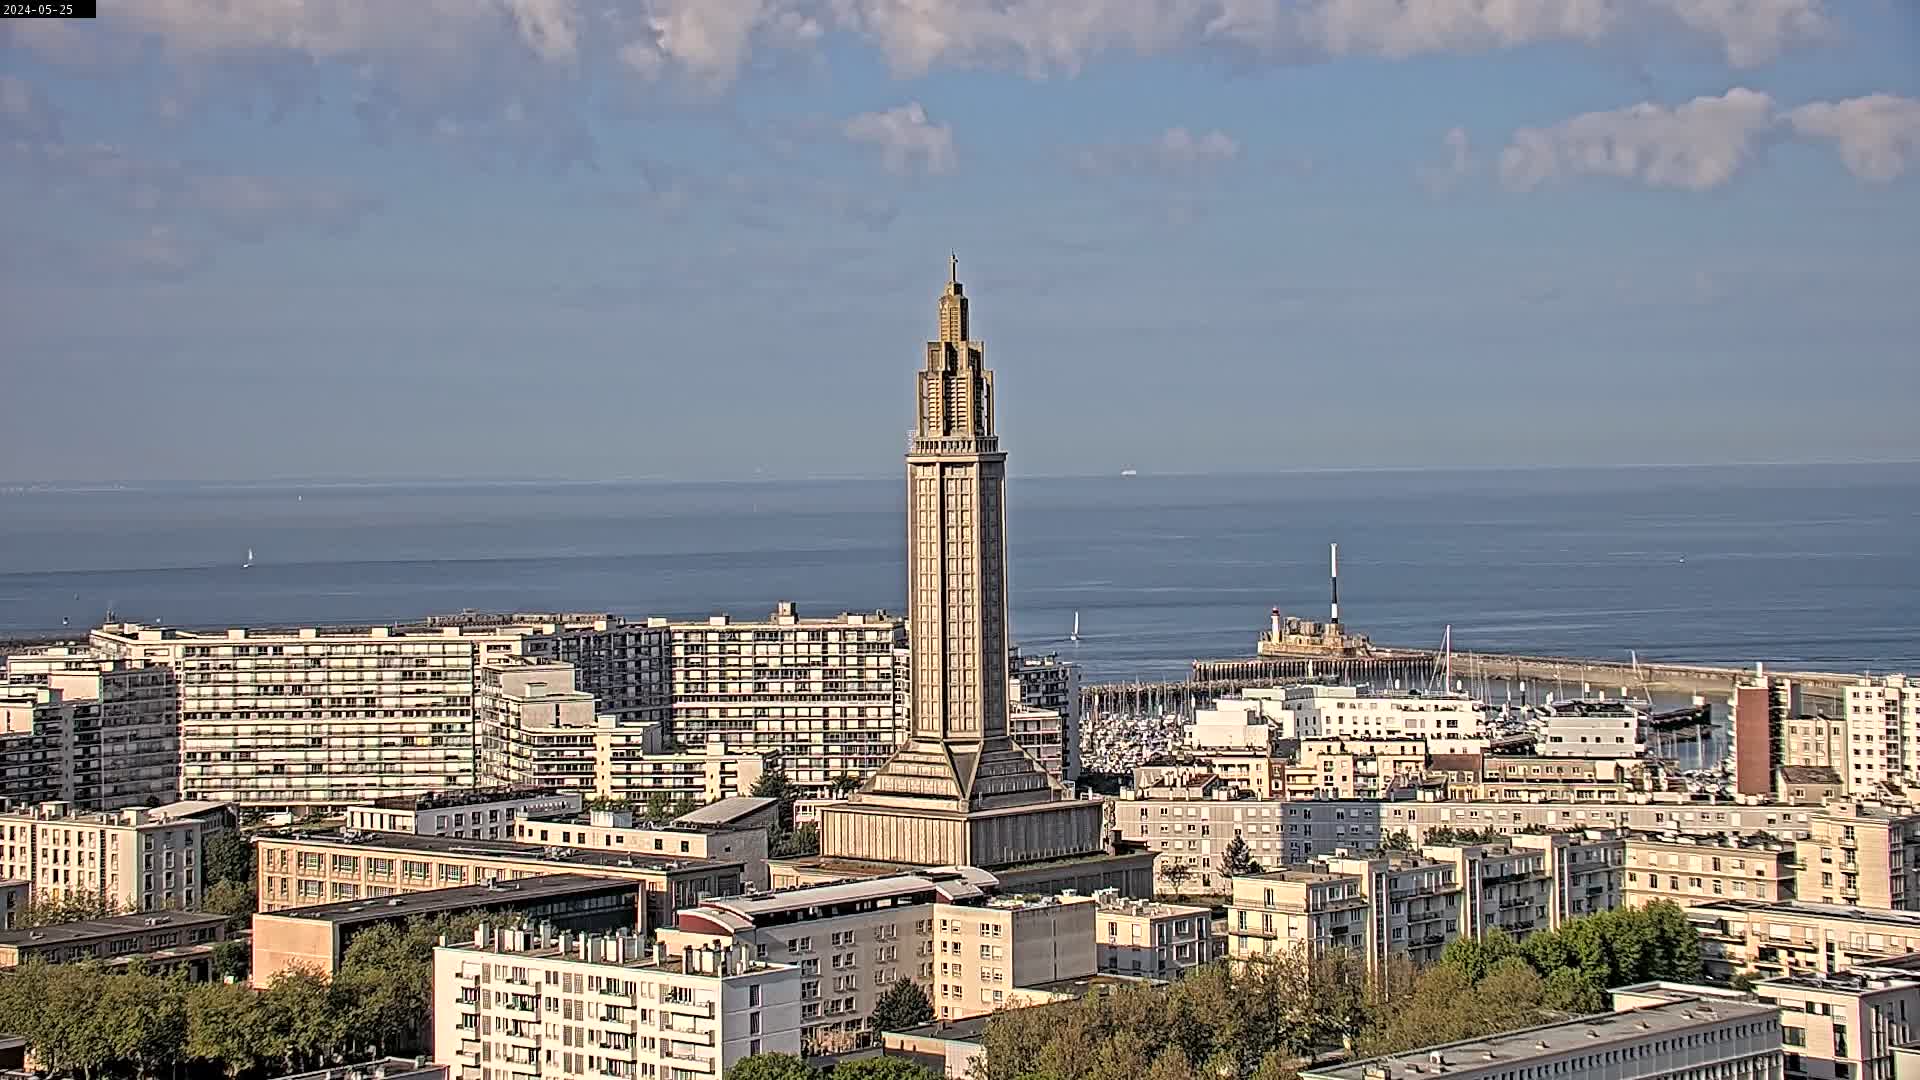 Le Havre Gio. 09:10